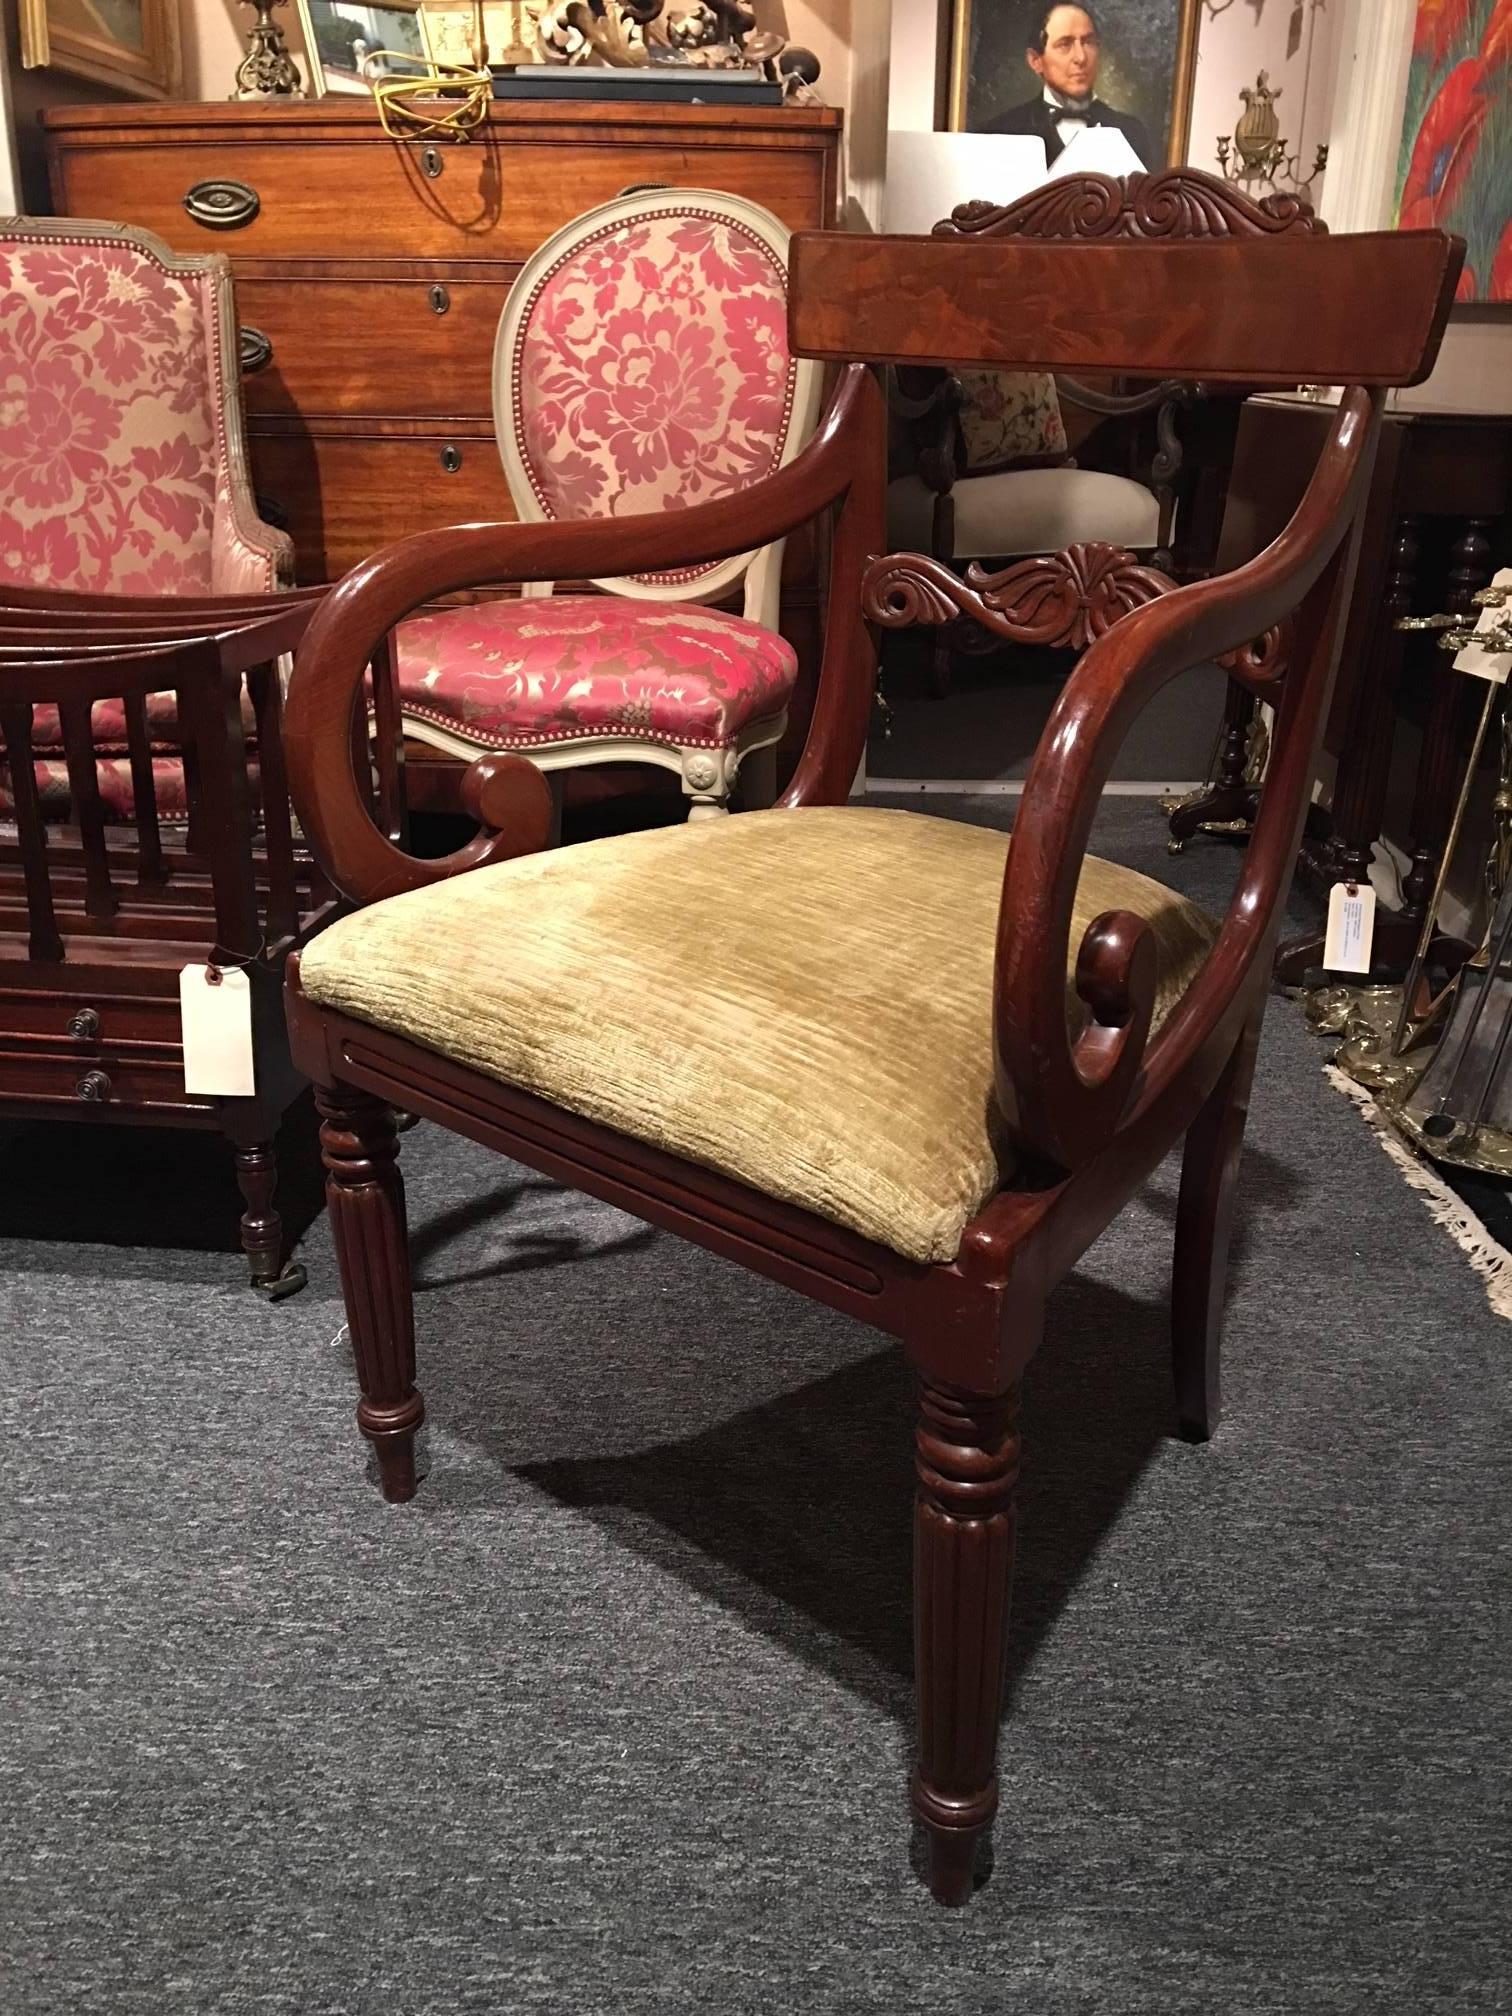 Pair of Regency mahogany armchairs standing on reeded legs with drop in seats and spay to the back legs, 19th century. The scroll of the arm is a nice design and the back splat and rest are a pleasing shape.